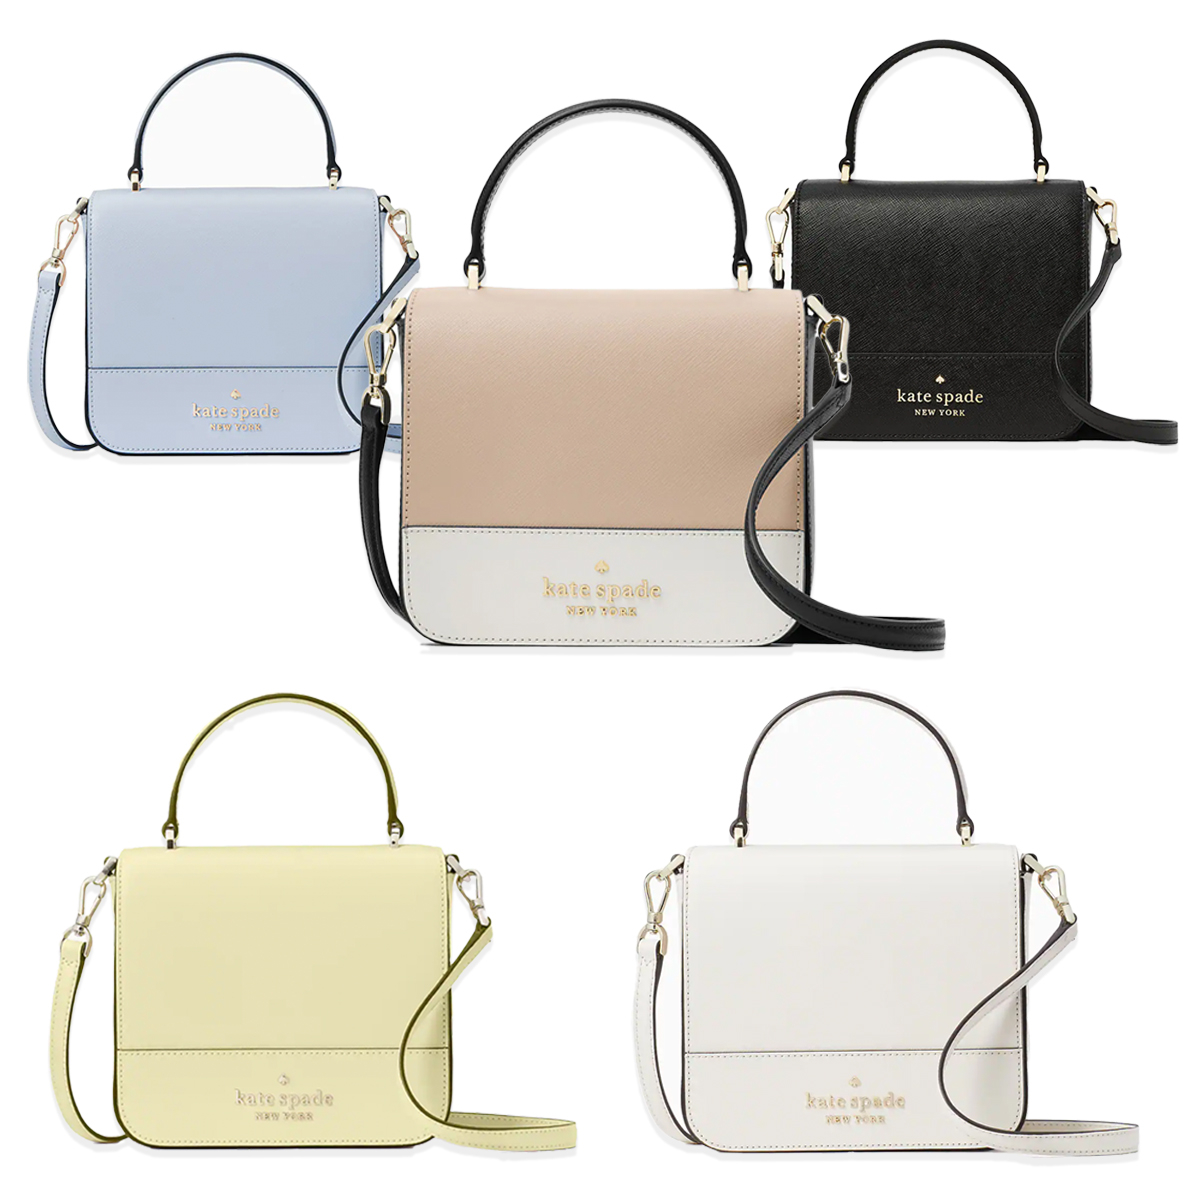 Kate Spade 24-Hour Flash Deal: Get a $300 Crossbody Bag for Just $75